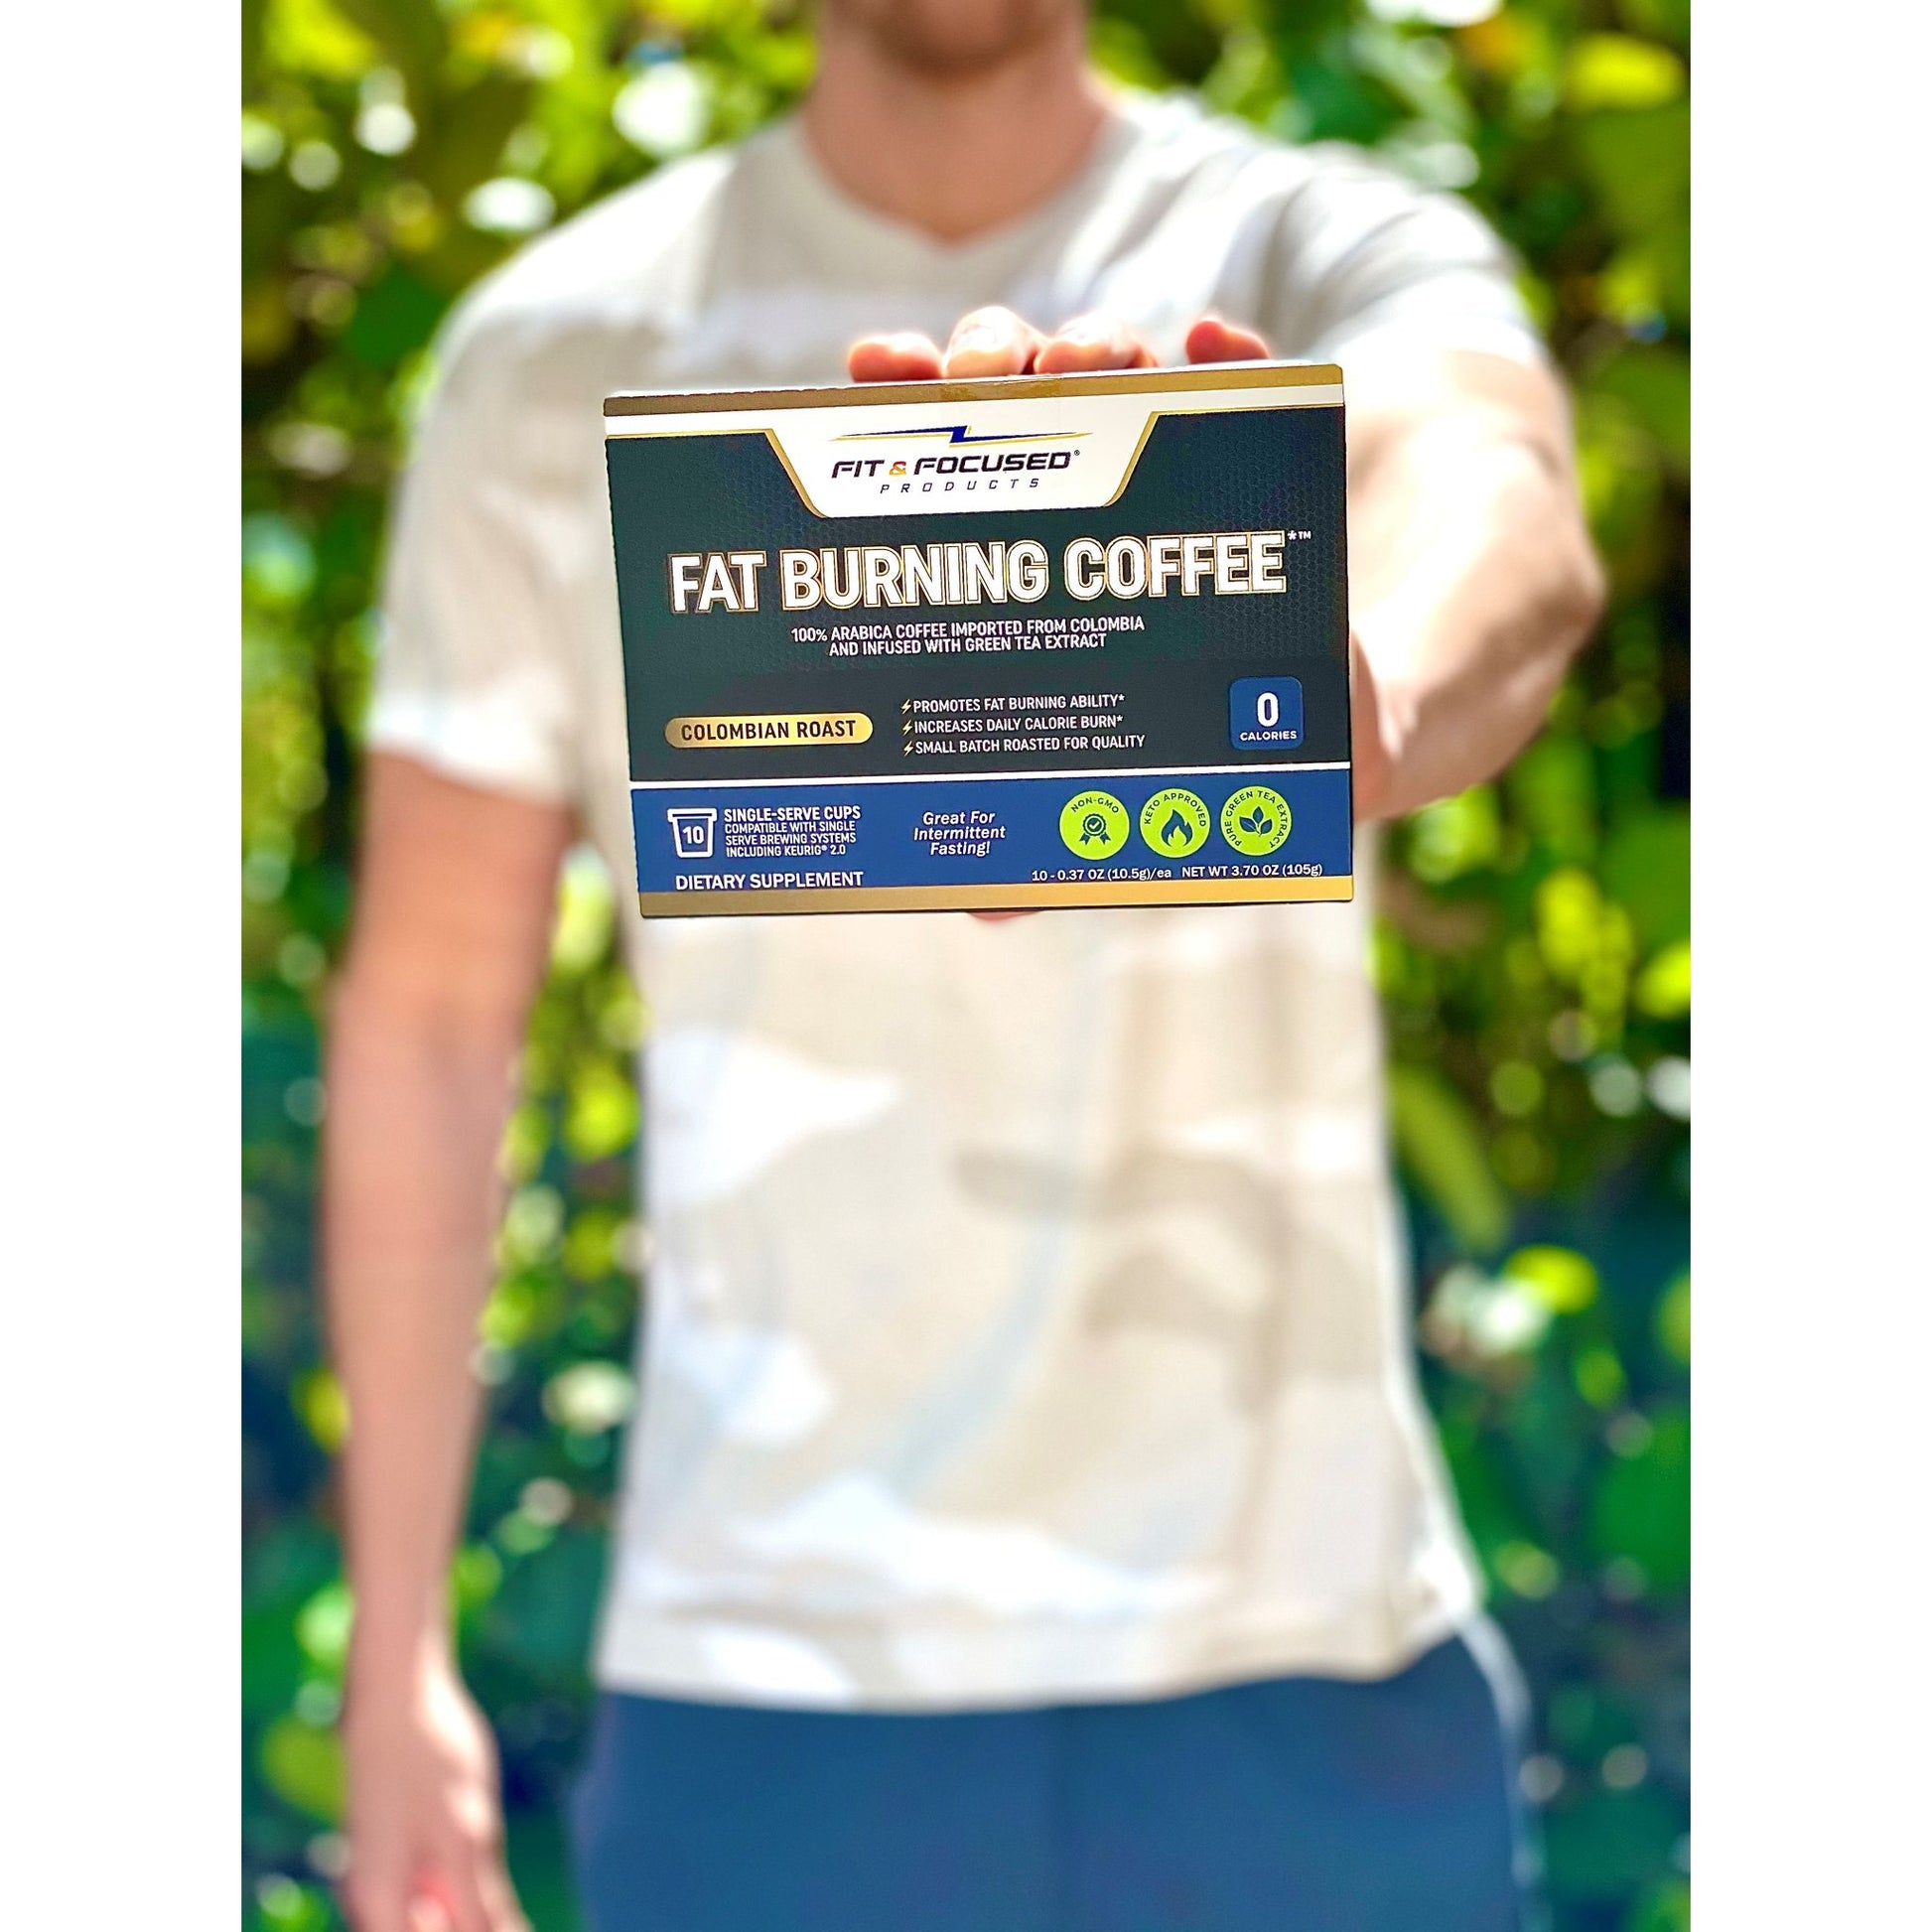 Fit & Focused Fat Burning K-Cup Coffee Box Being Held By Athlete